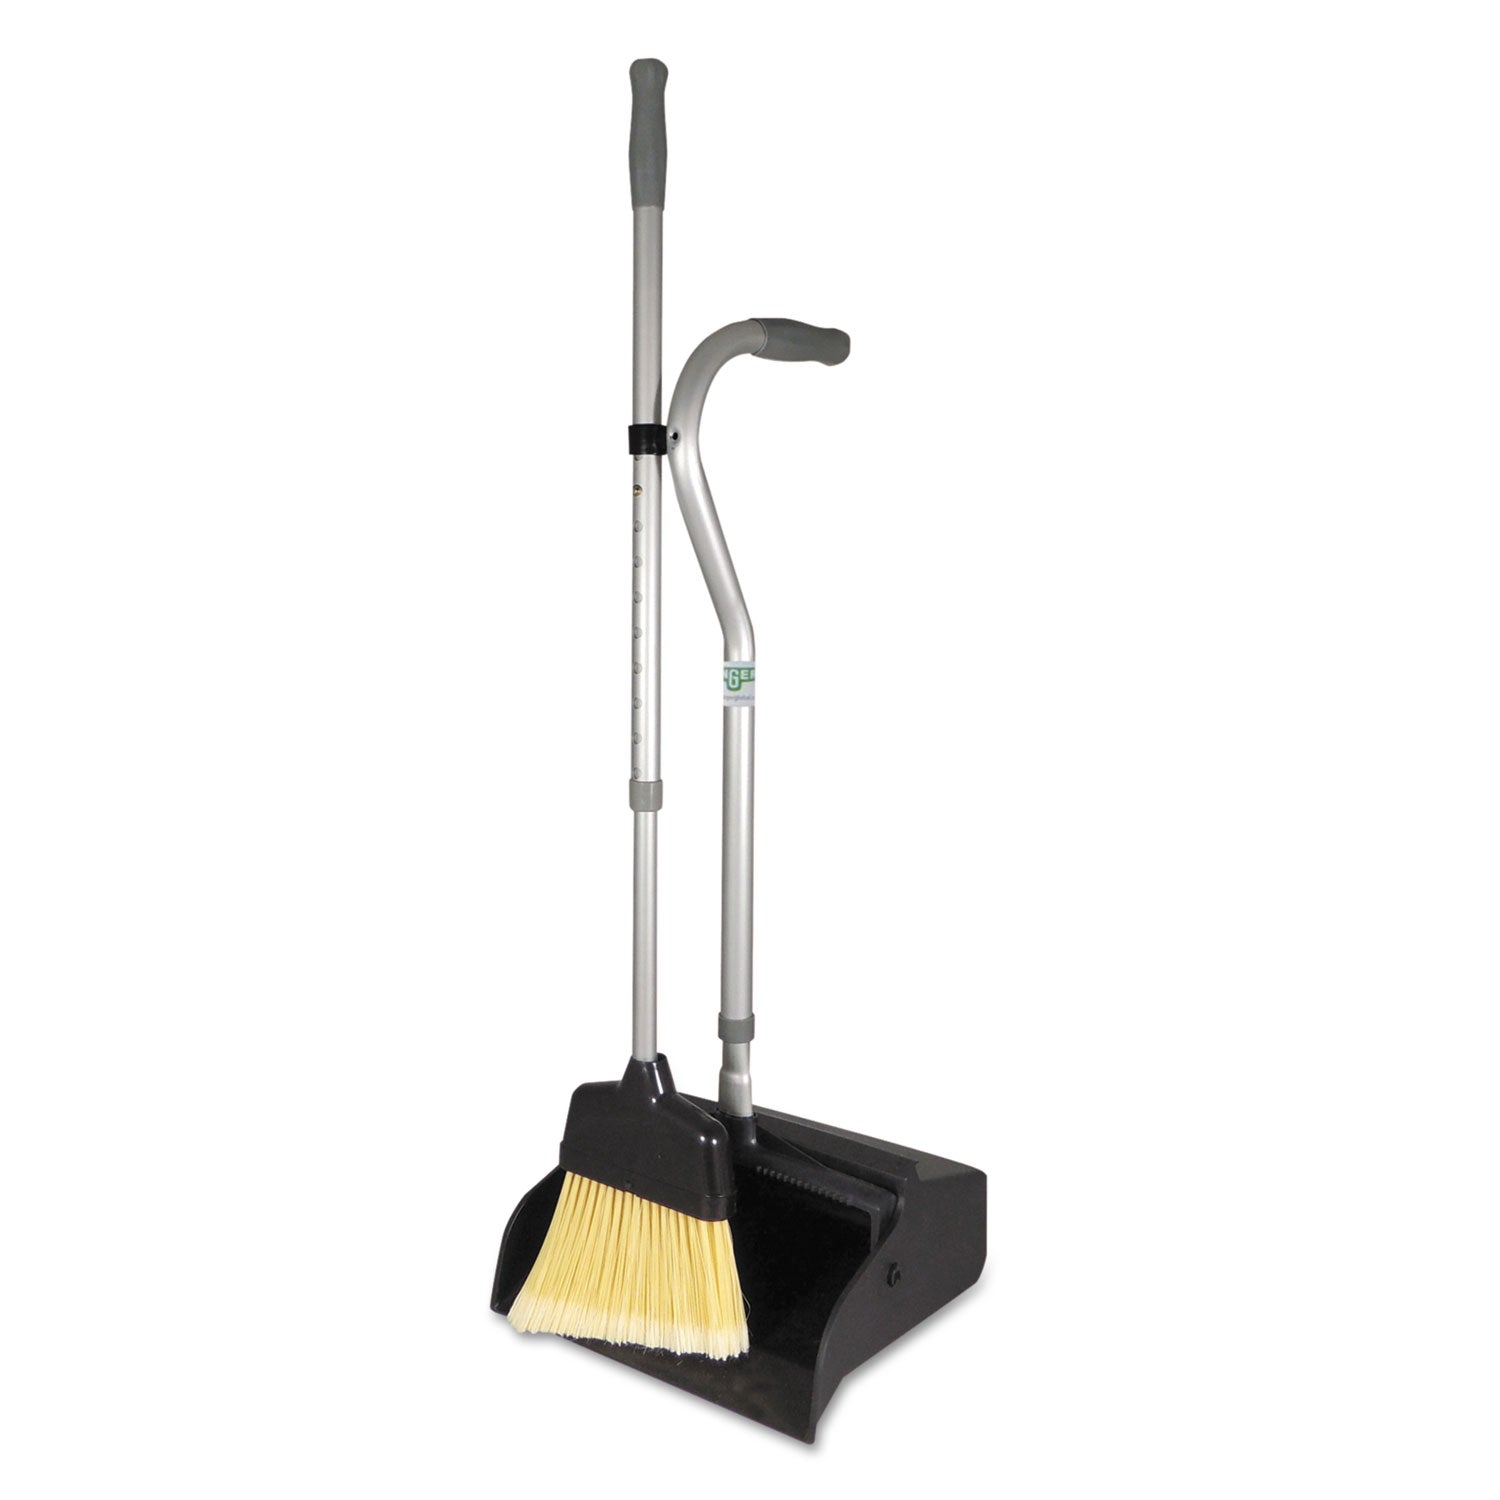 telescopic-ergo-dust-pan-with-broom-12w-x-45h-metal-gray-silver_ungedtbg - 1